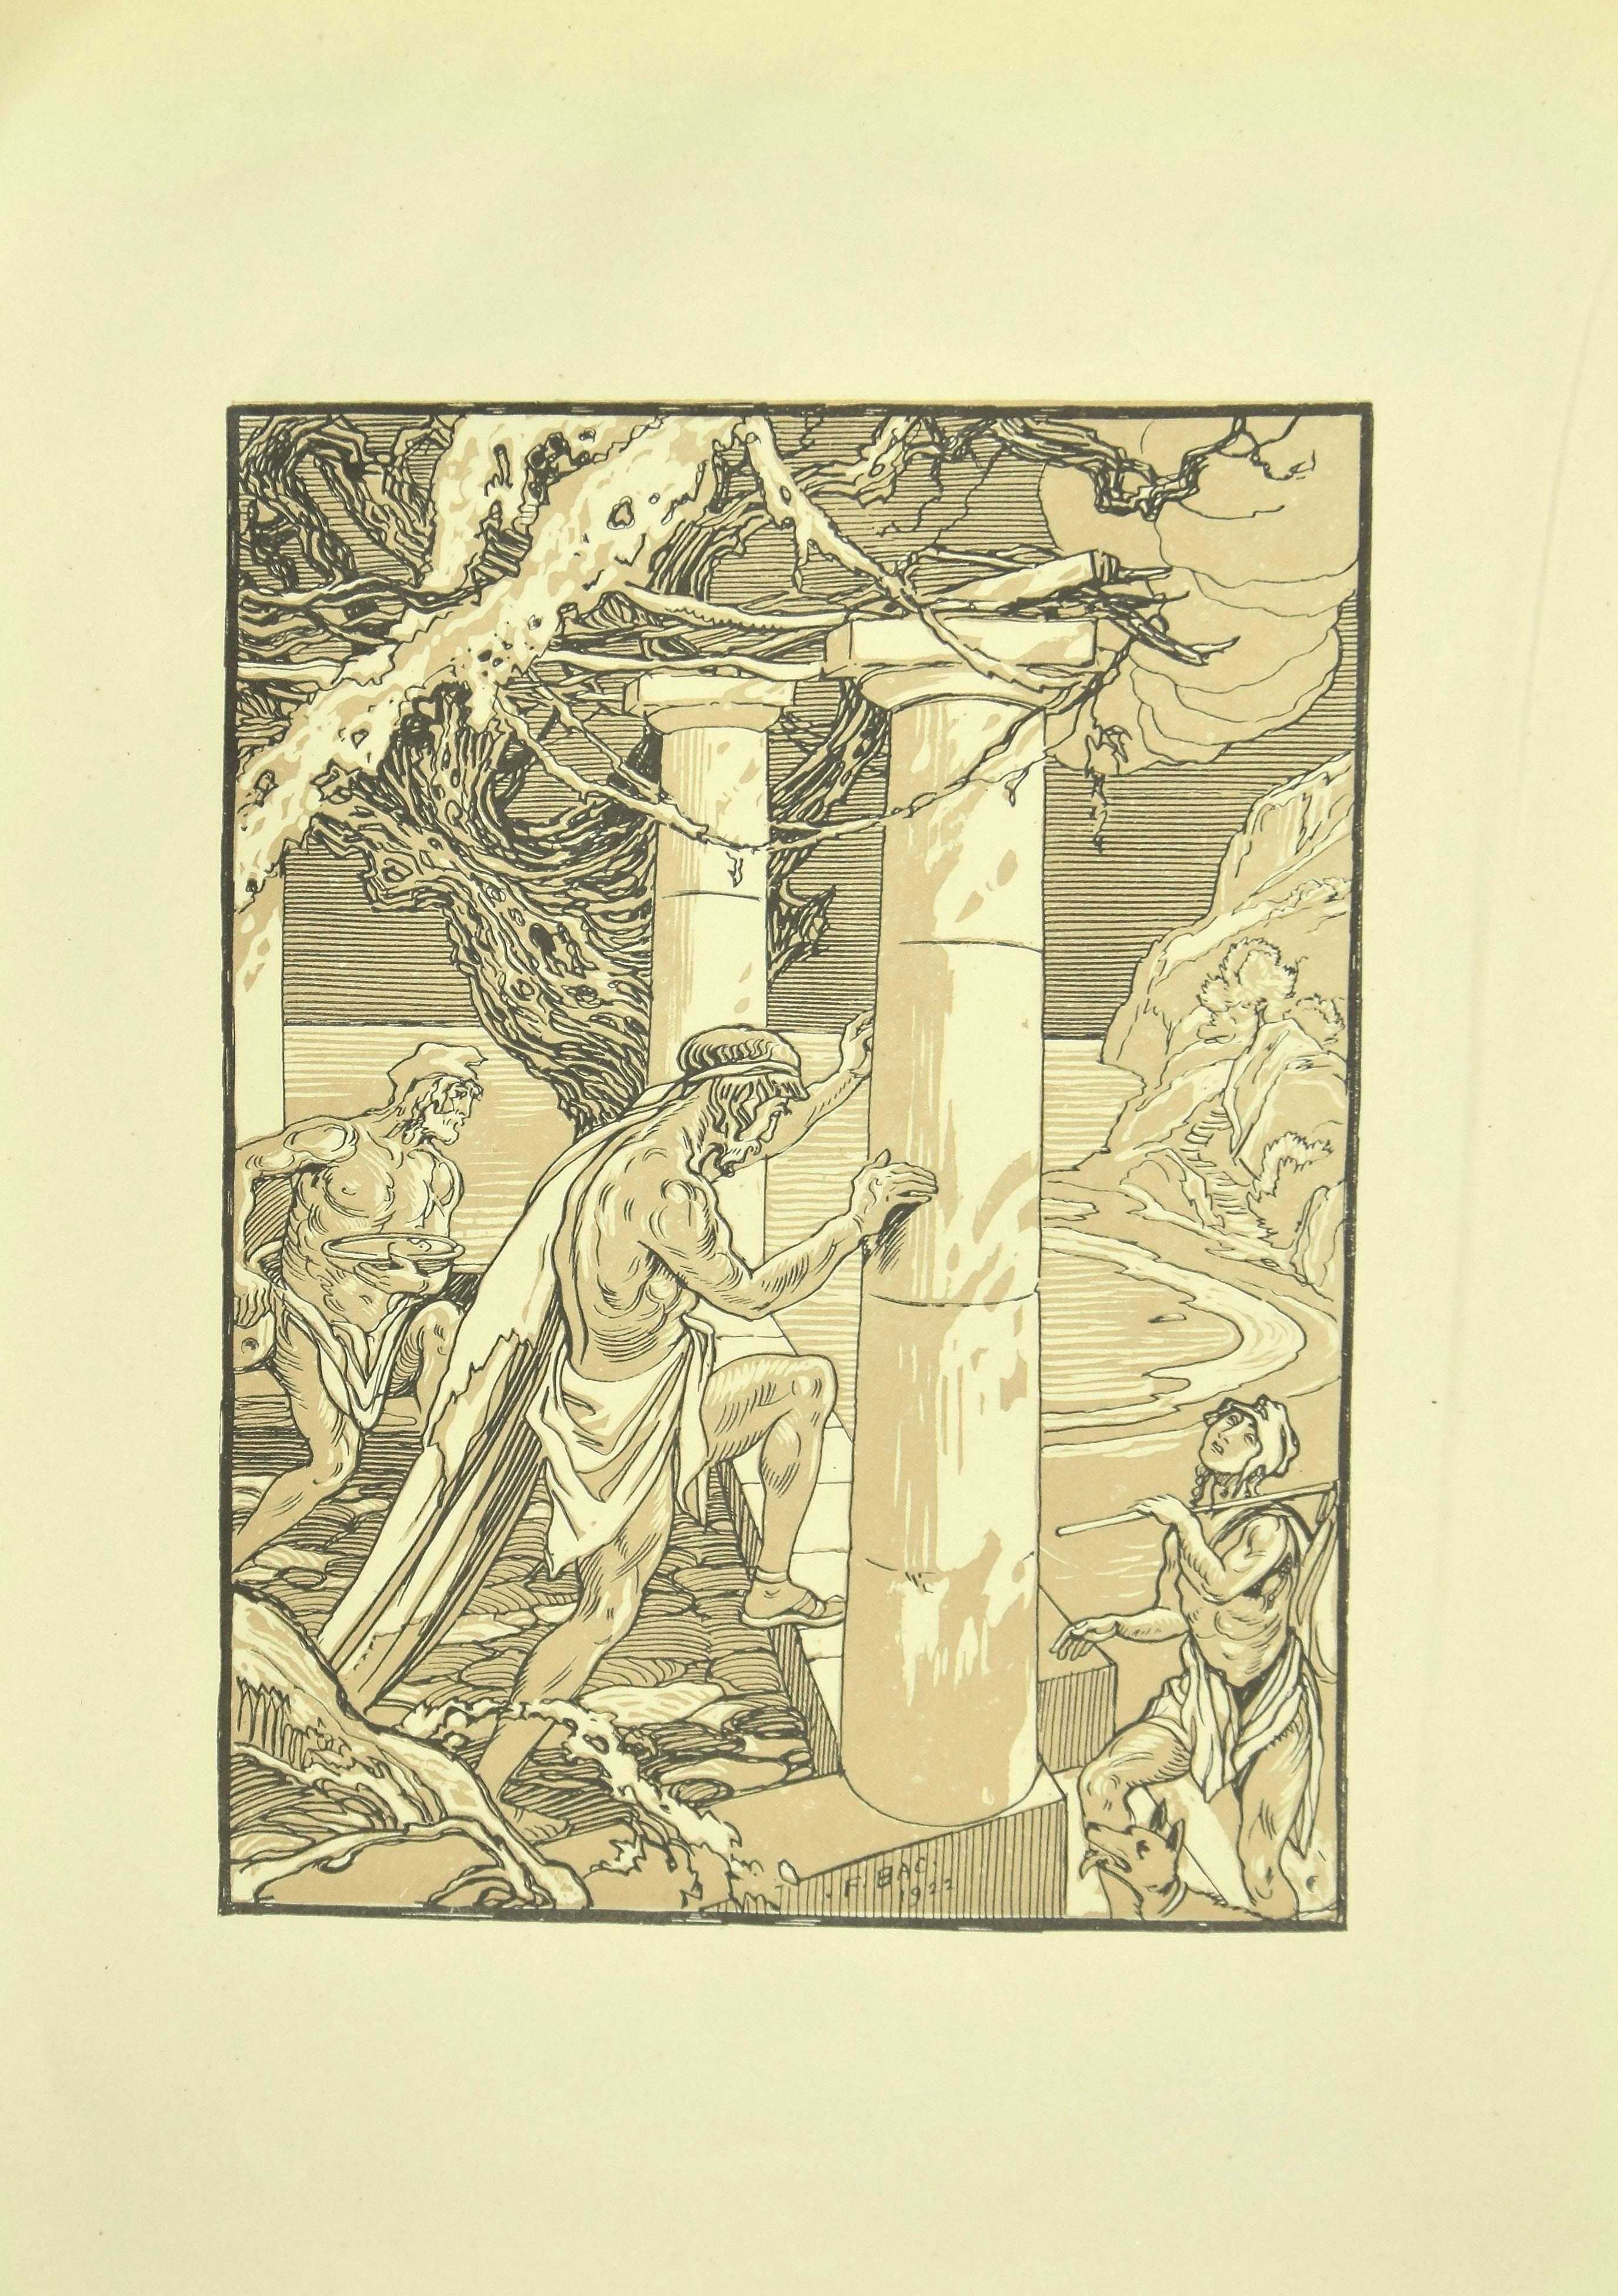 The Men and the Column - Original Lithograph by F. Bac - 1922